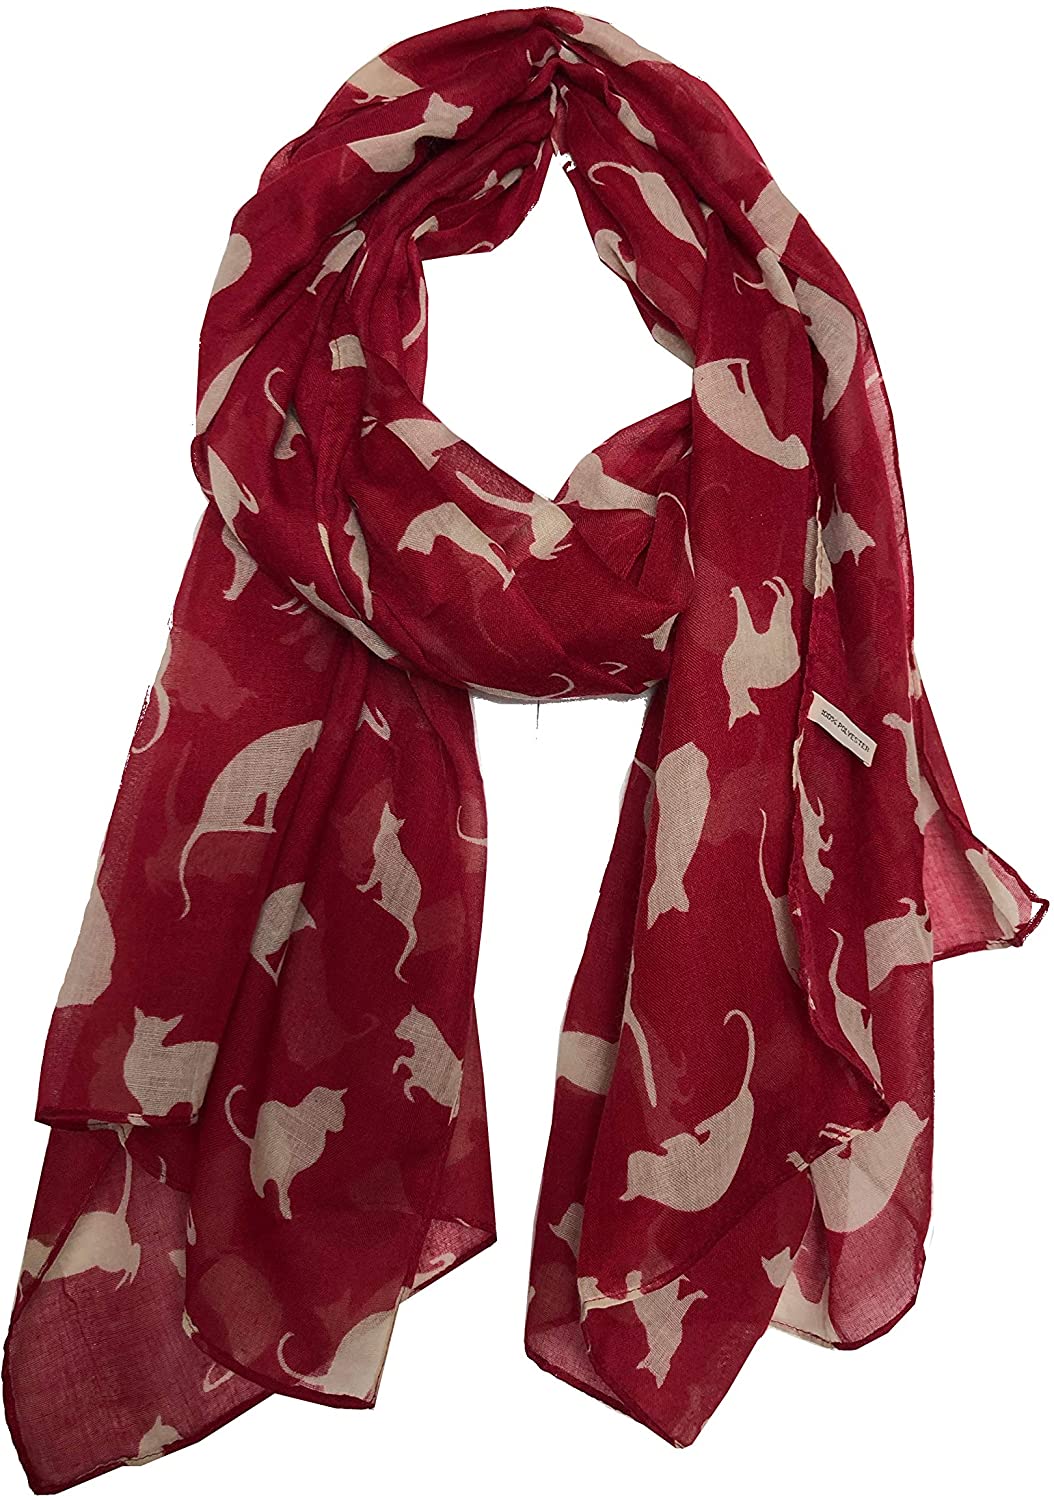 Red with Beige Cats Scarf, Beautiful Design, Fantastic for The Animal Lover in us All